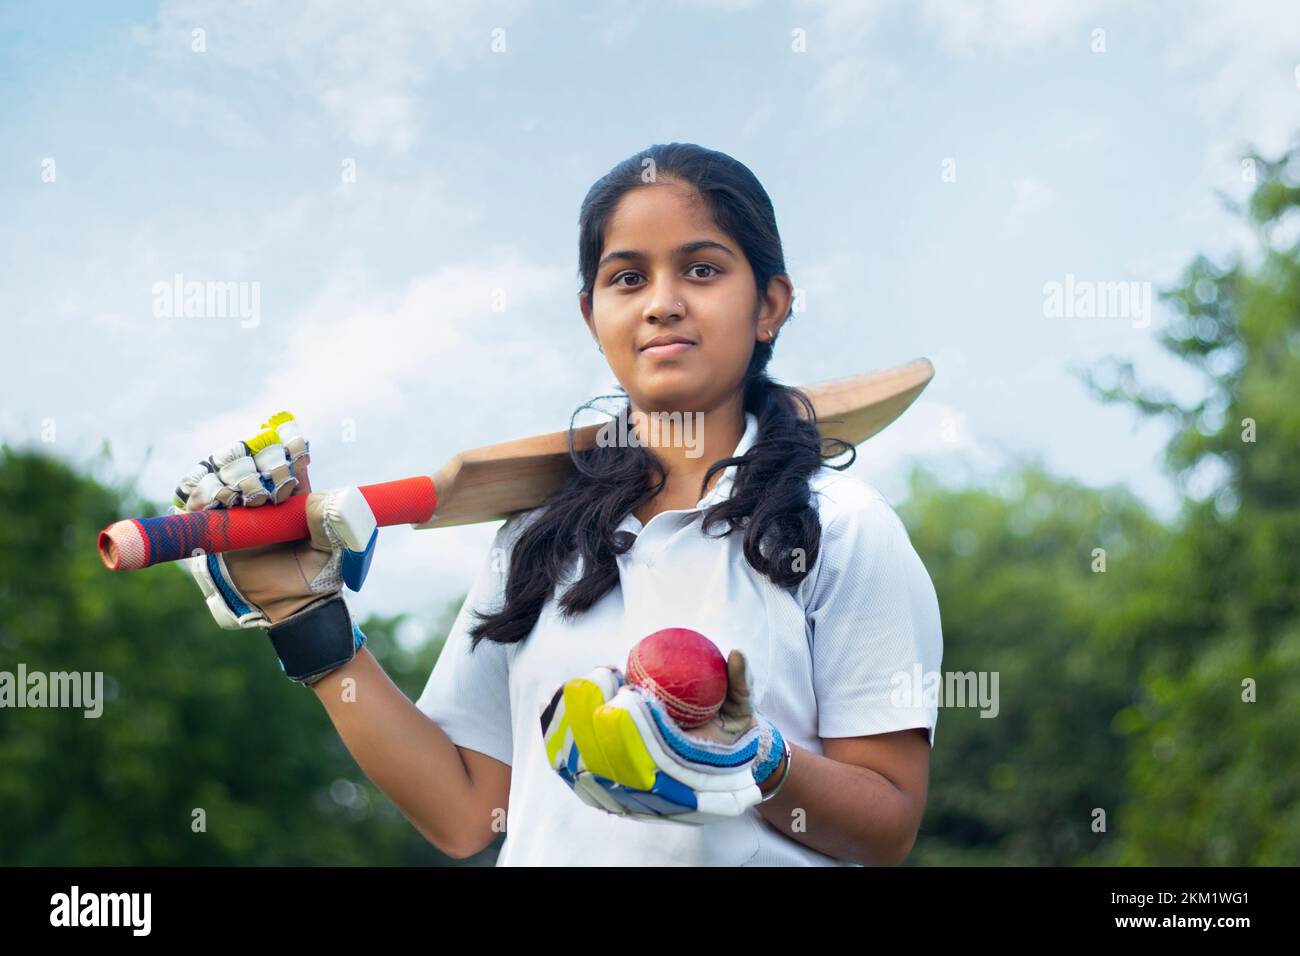 Portrait Of A Female Cricketer Holding A Cricket Bat And A Ball Stock Photo